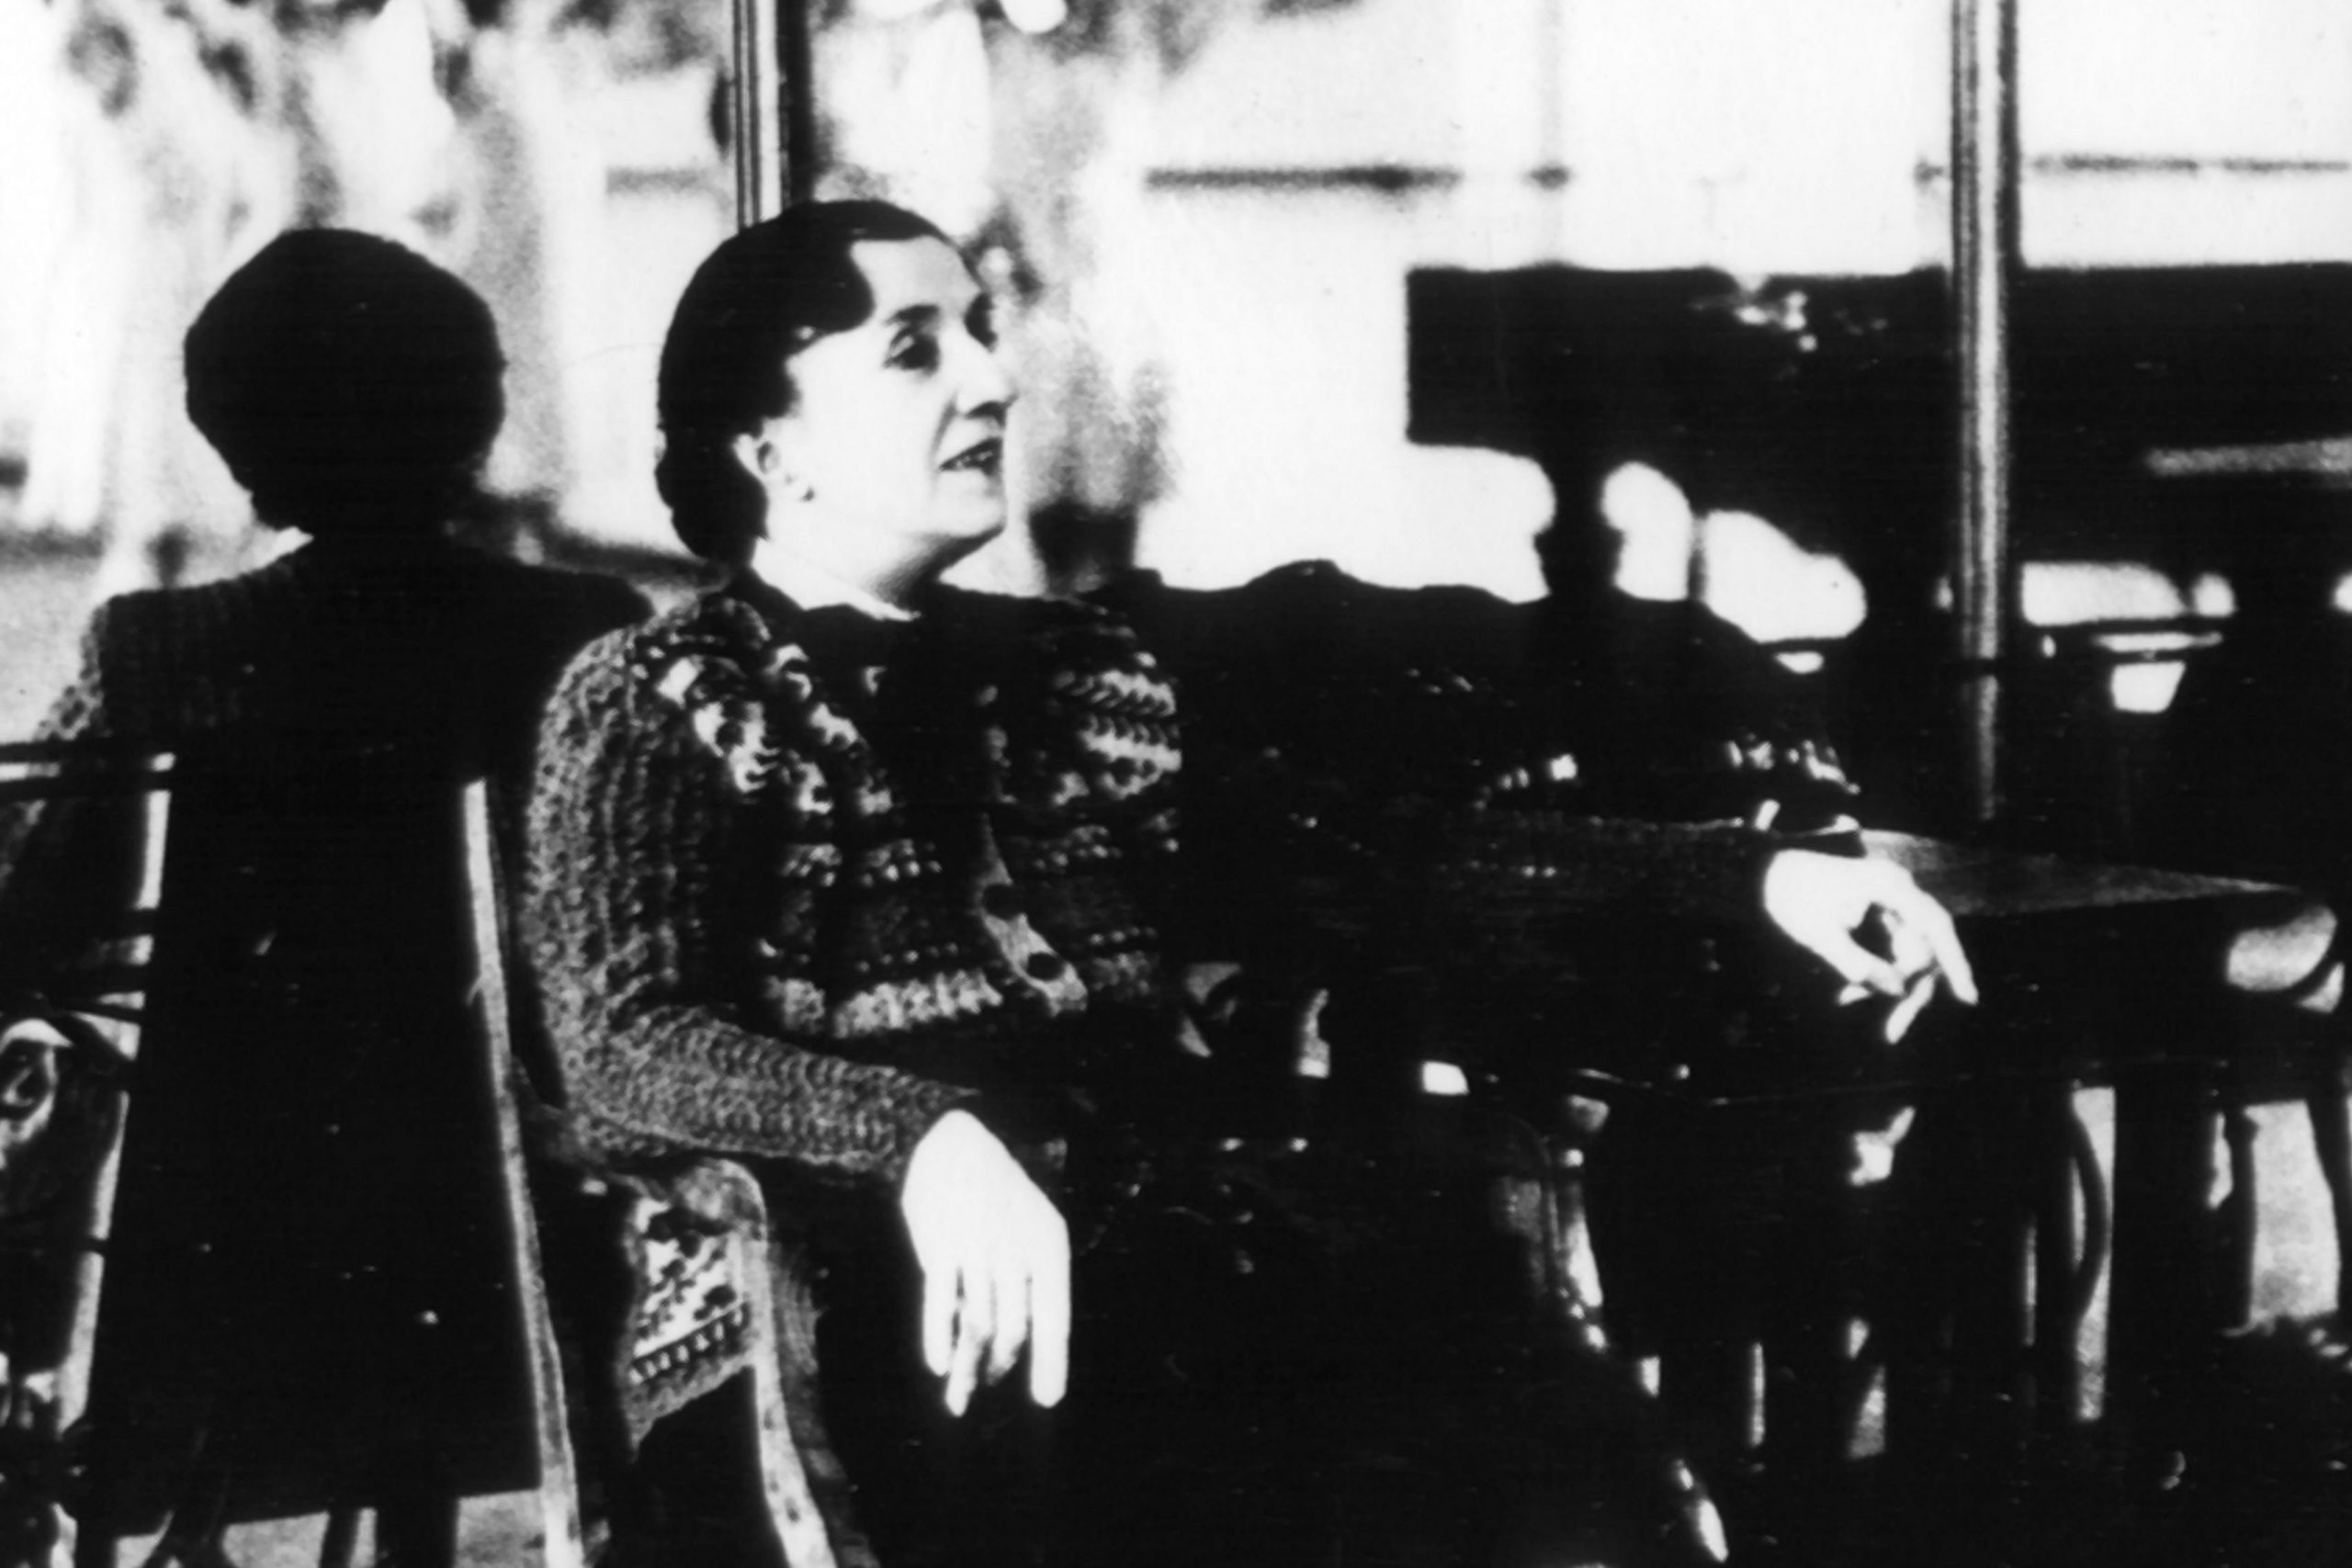 In this black and white archival photo, Agrippina Vaganova sits in a chair at the front of the studio, her back towards a mirror, and watches dancers (unseen) in class. She wears a wool sweater cardigan and long dark skirt. A grand piano is seen in the mirror's reflection.